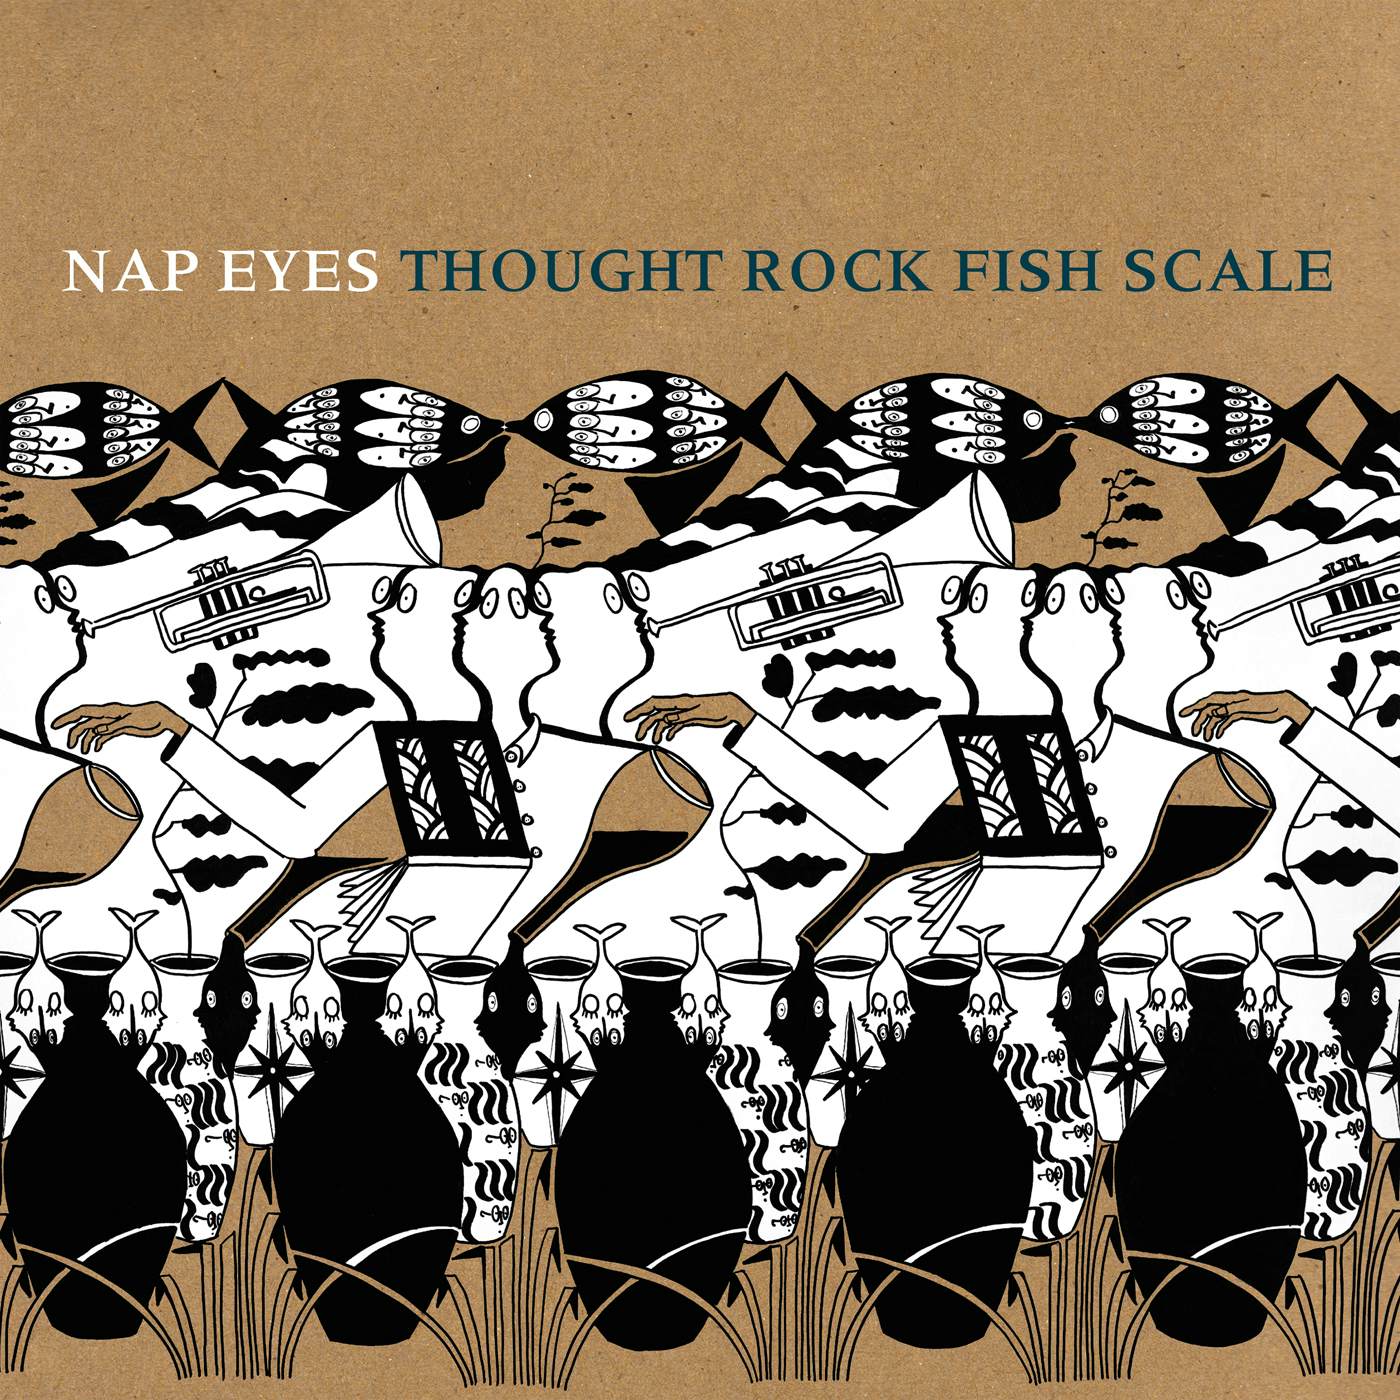 Nap Eyes Thought Rock Fish Scale Vinyl Record